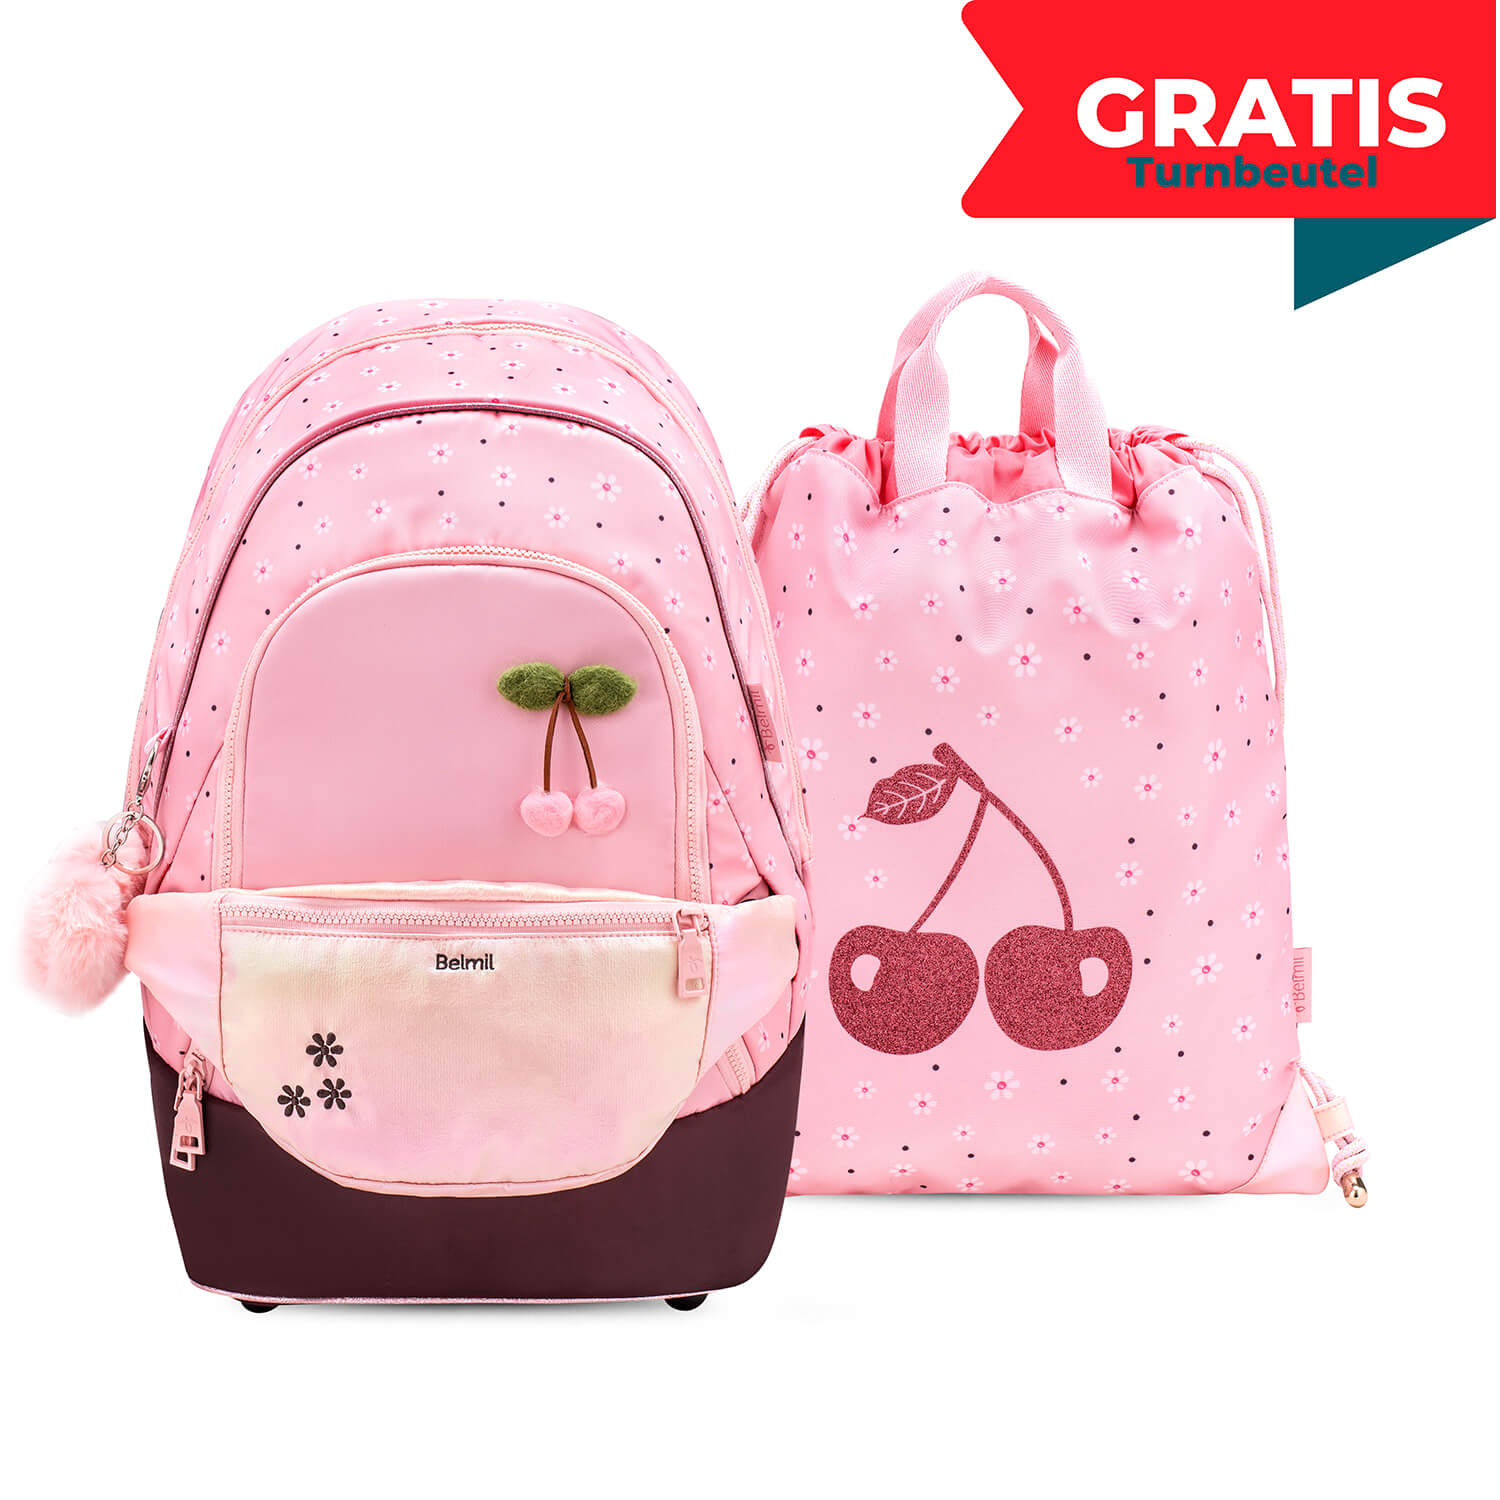 Premium Backpack & Fanny Pack Cherry Blossom Schoolbag 2pcs. with GRATIS Gymbag